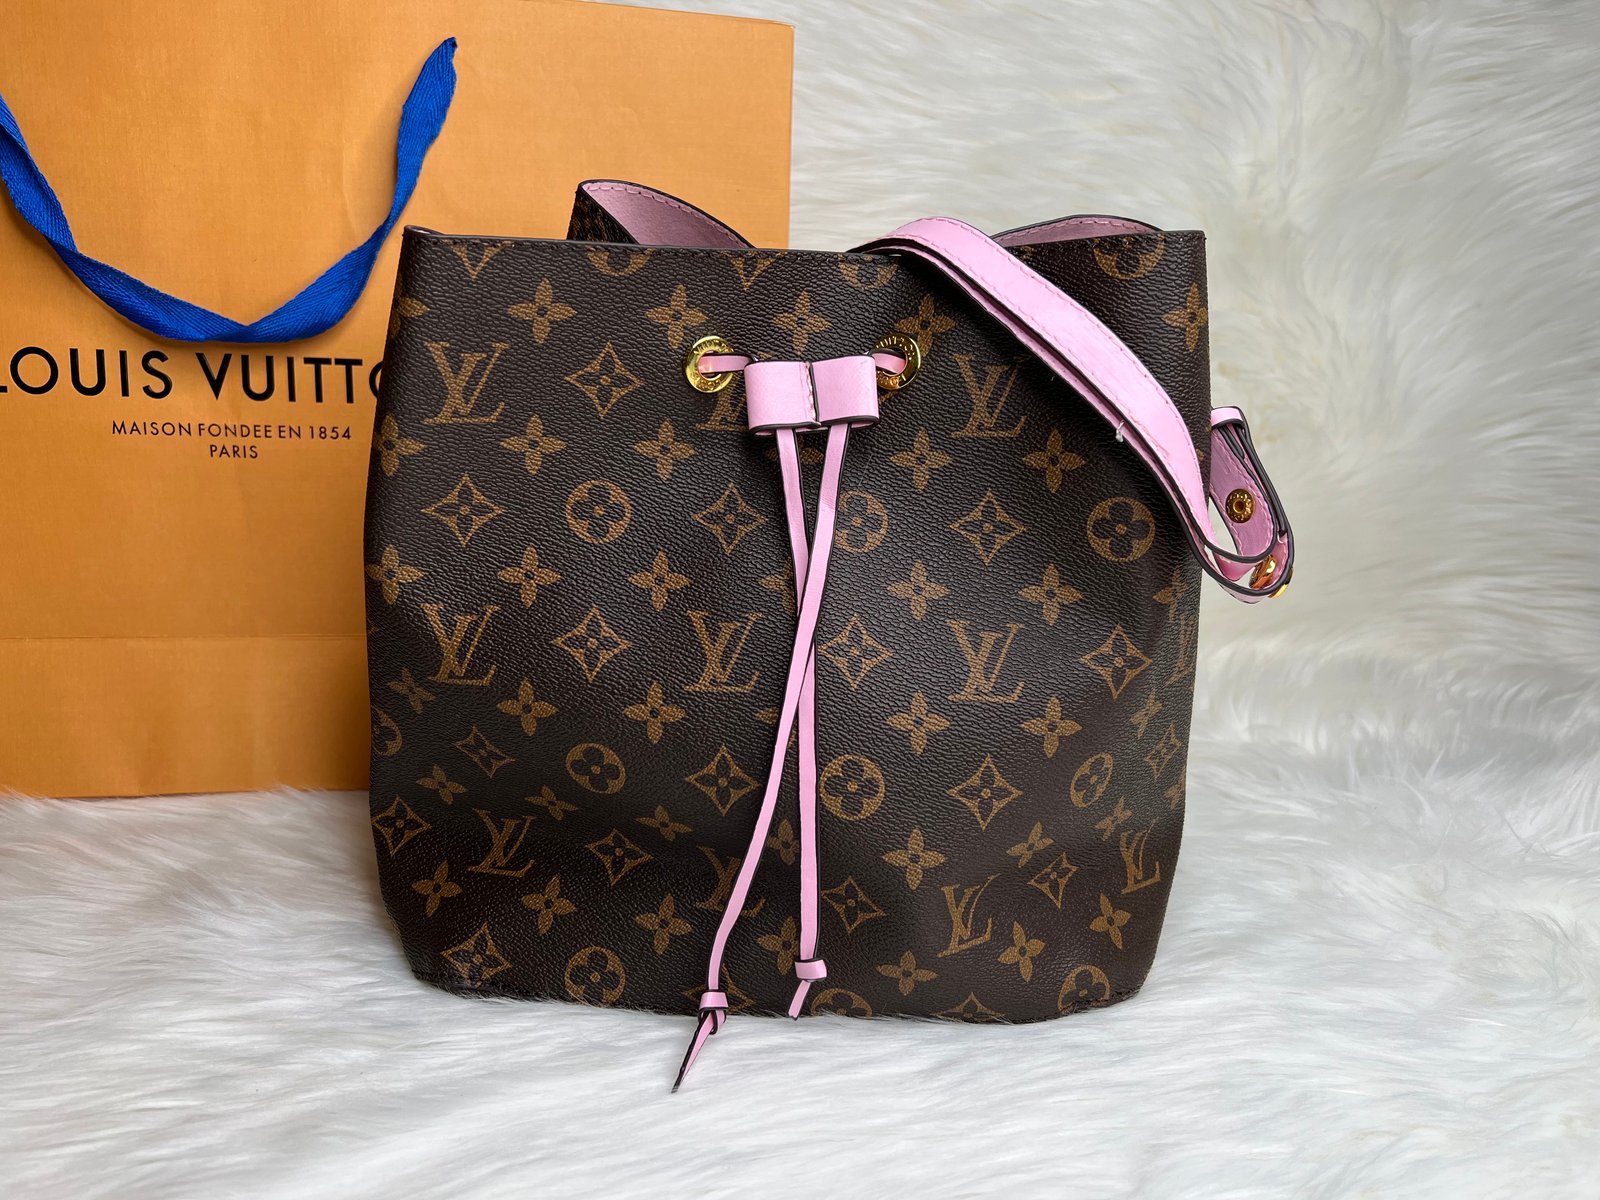 Luxe, Louis Vuitton Nano Bags, Gallery posted by Nikki